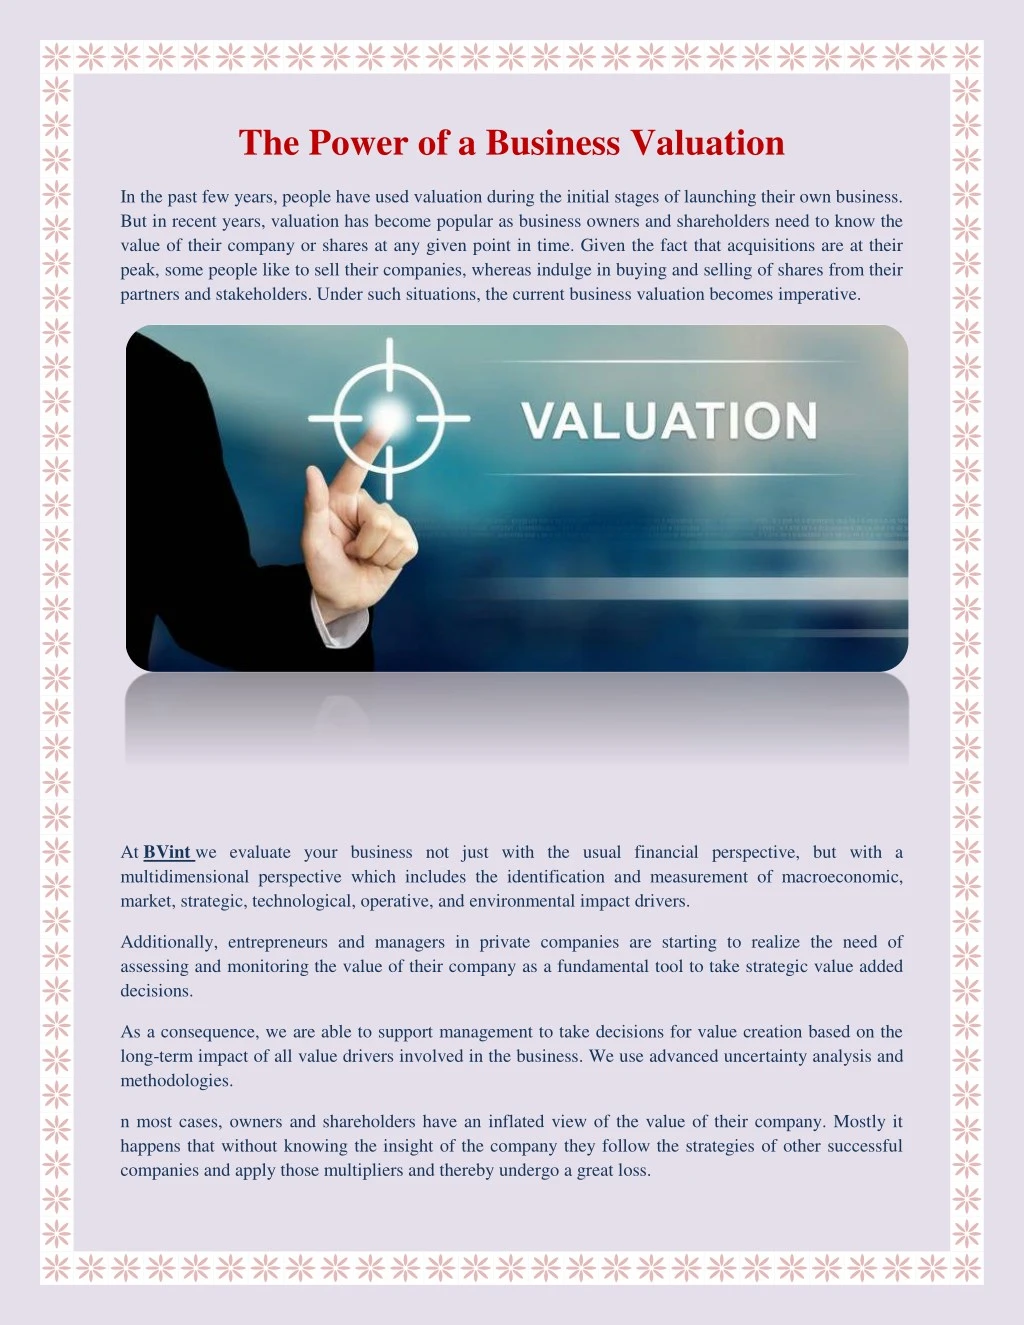 the power of a business valuation